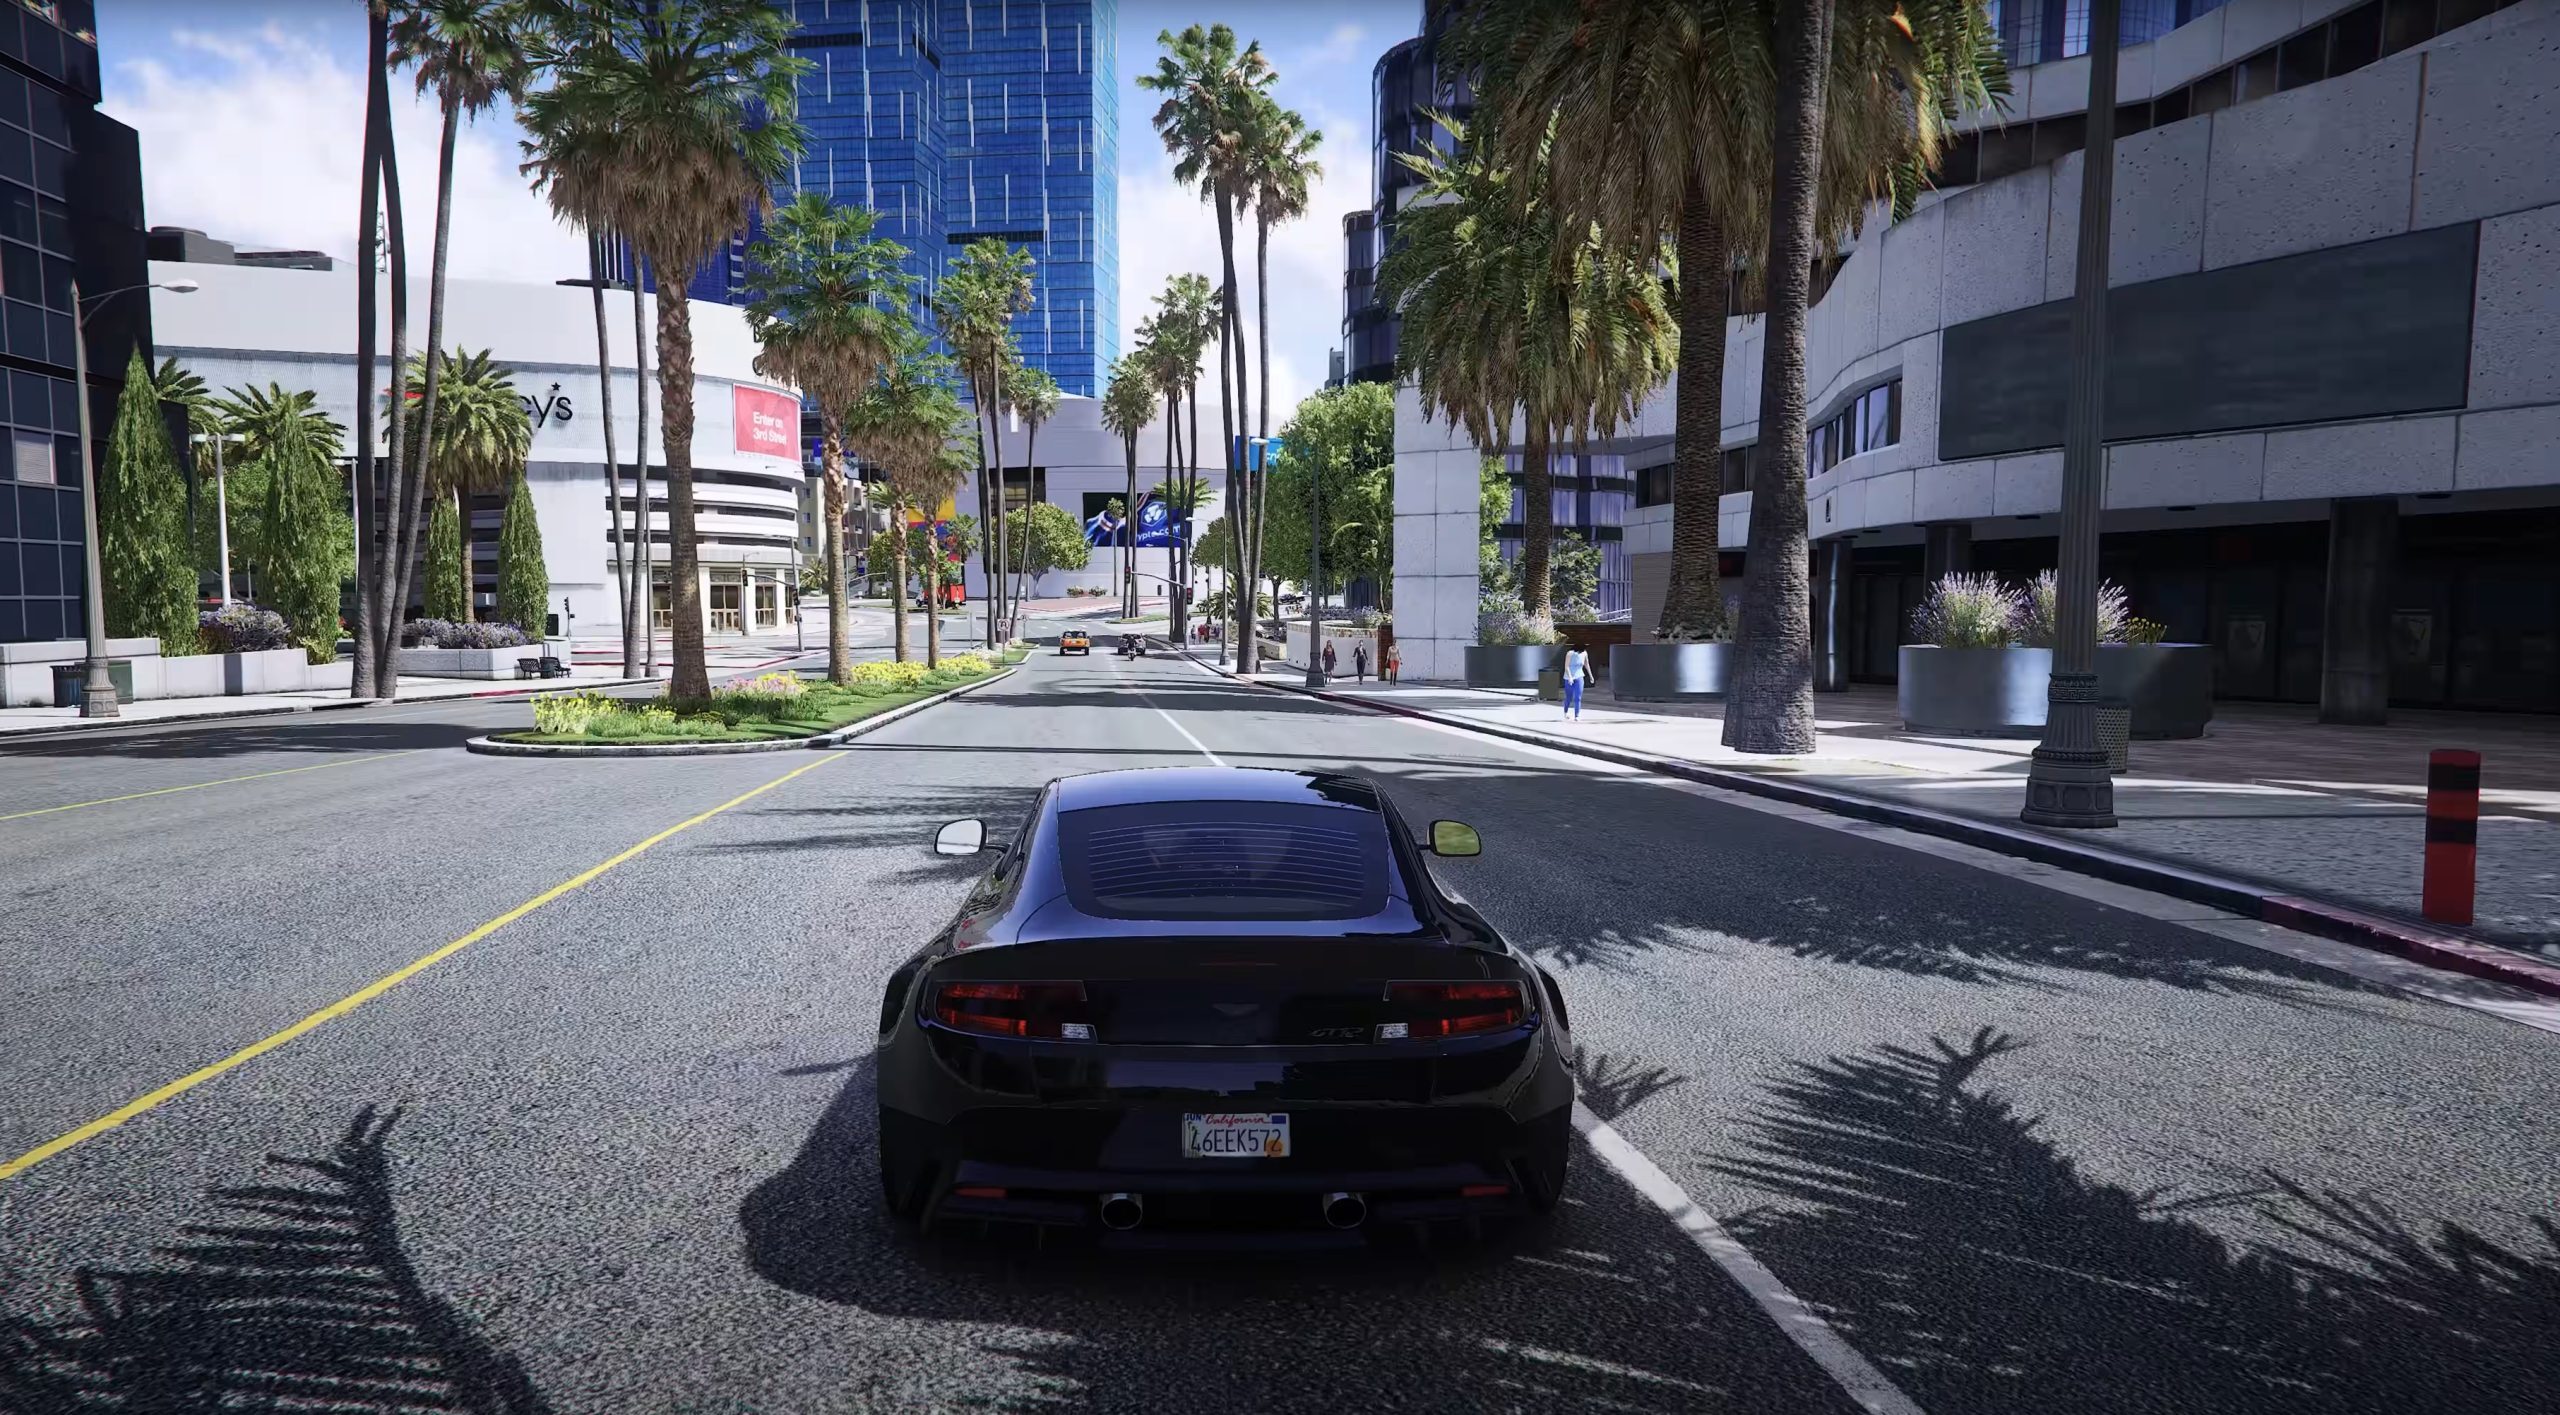 Check out 10 minutes of new GTA 5 ray tracing footage